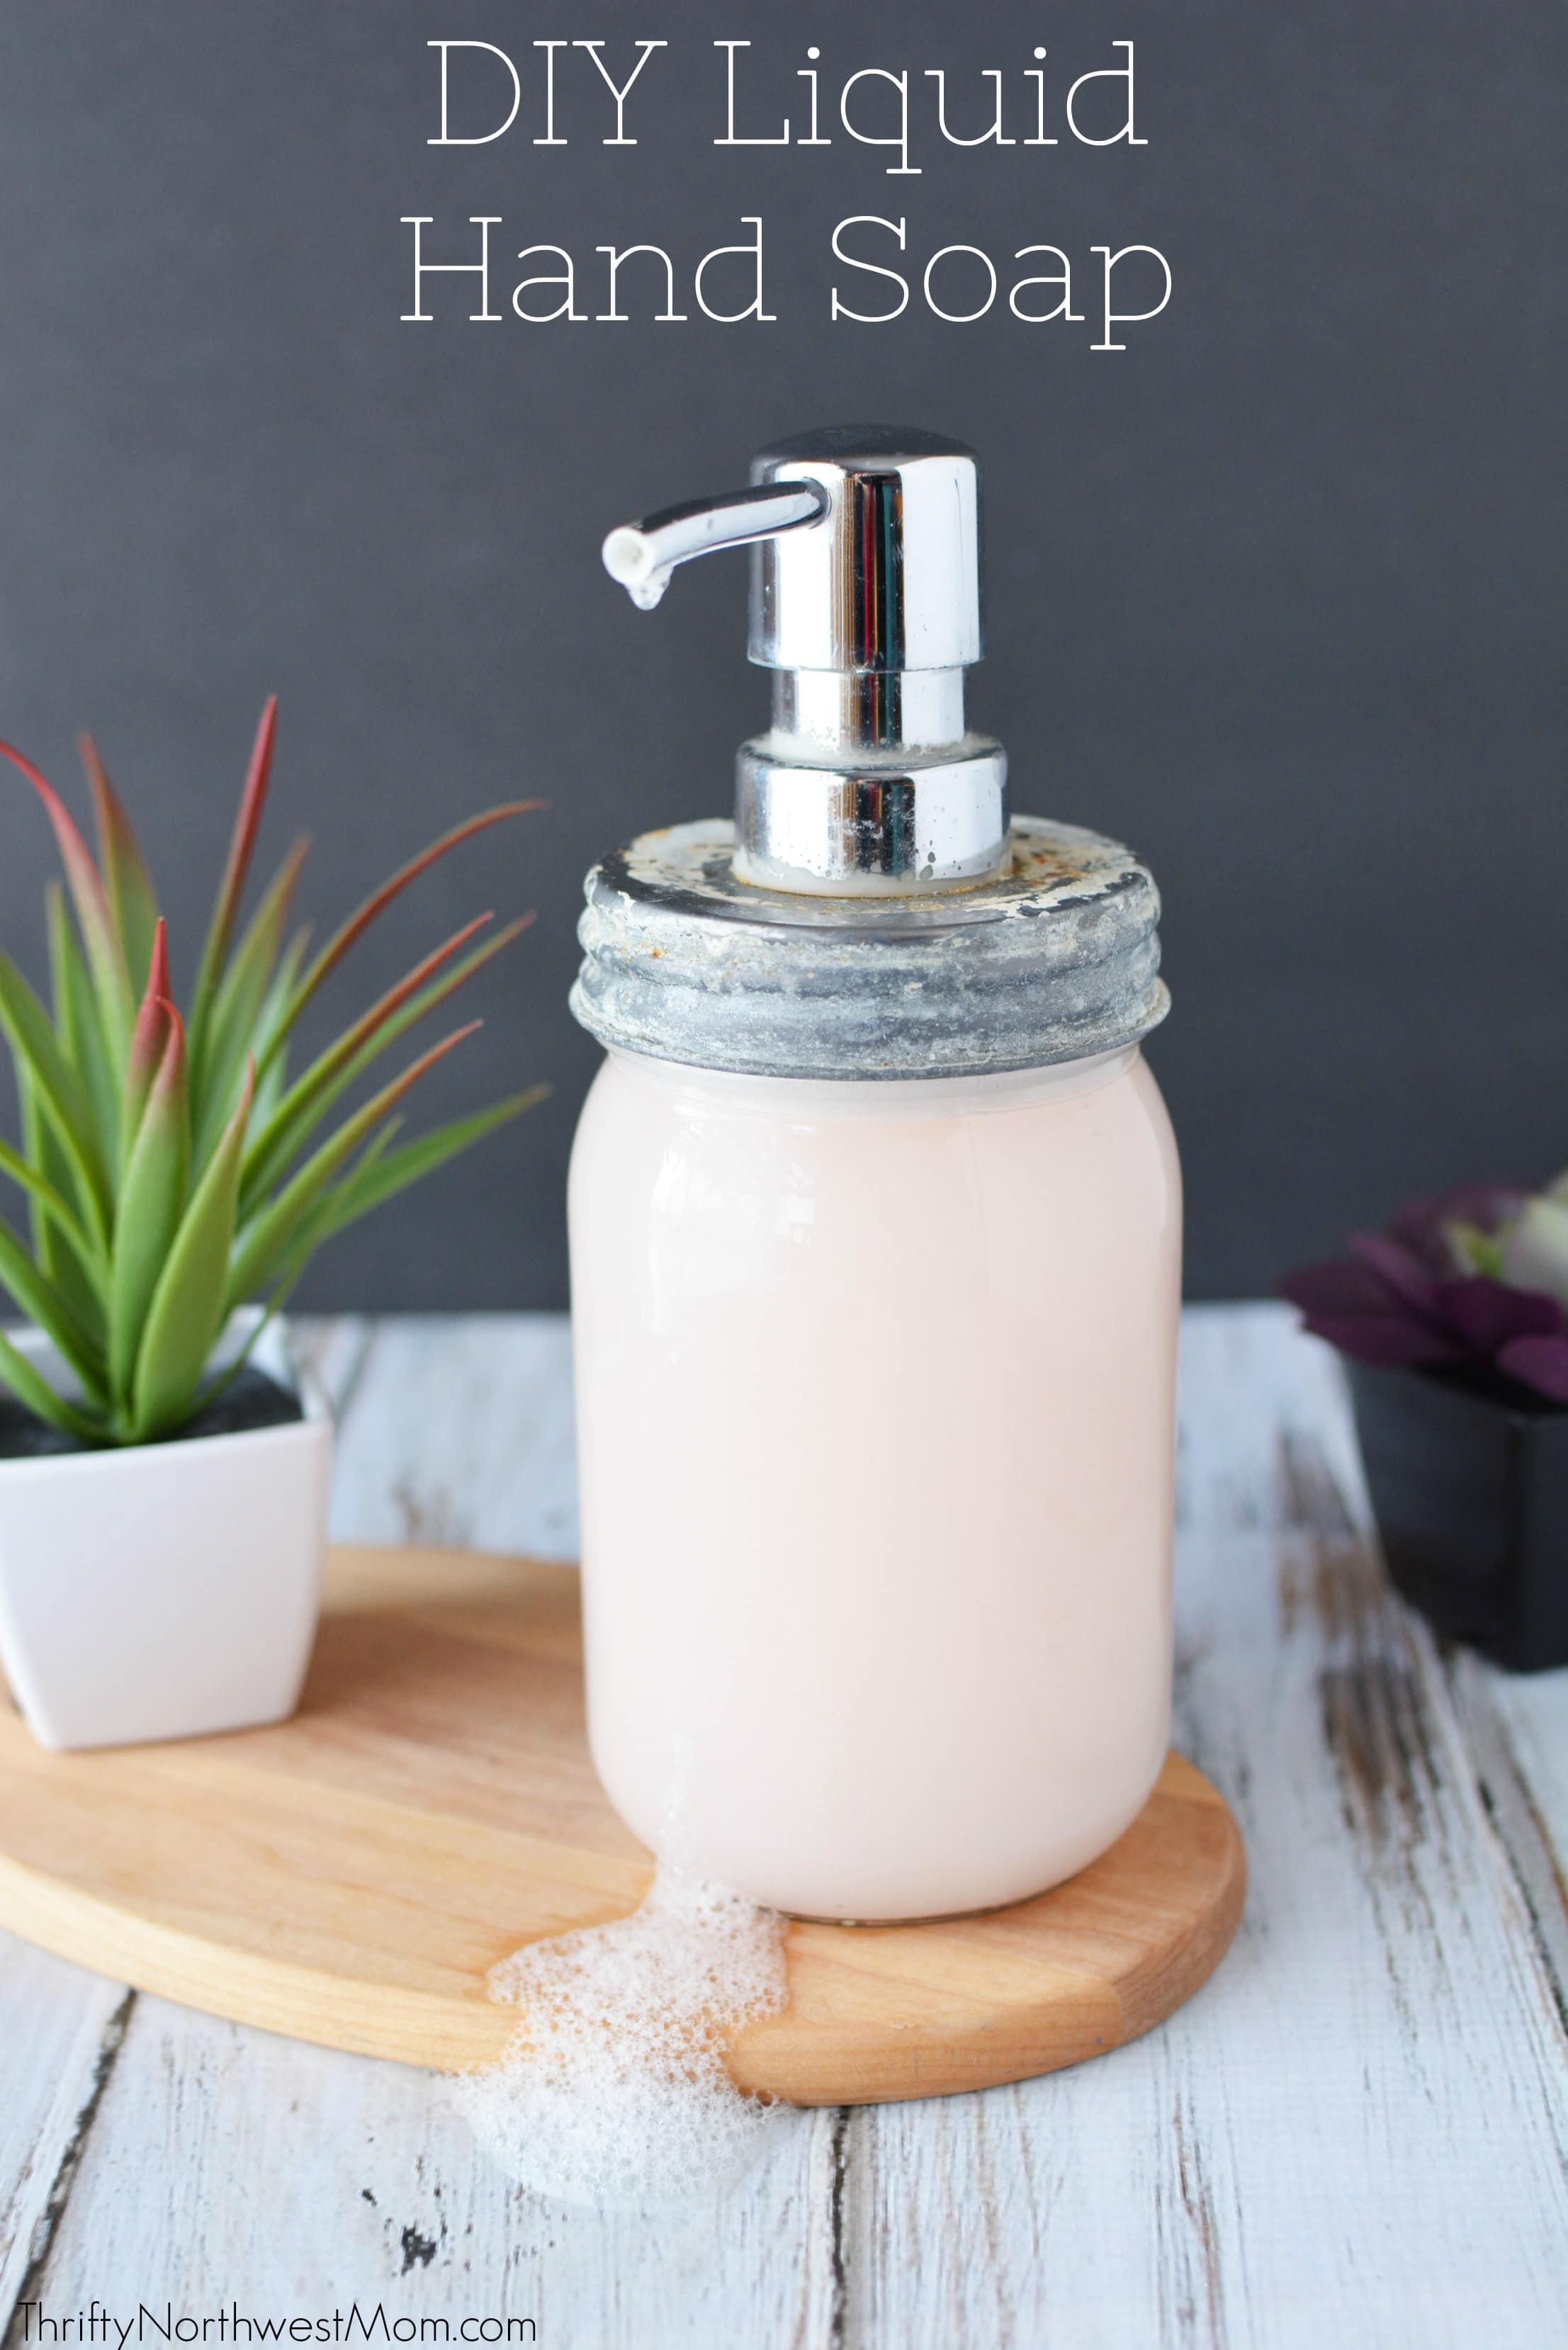 DIY Liquid Hand Soap is frugal & natural for using in your home as a DIY cleaning option